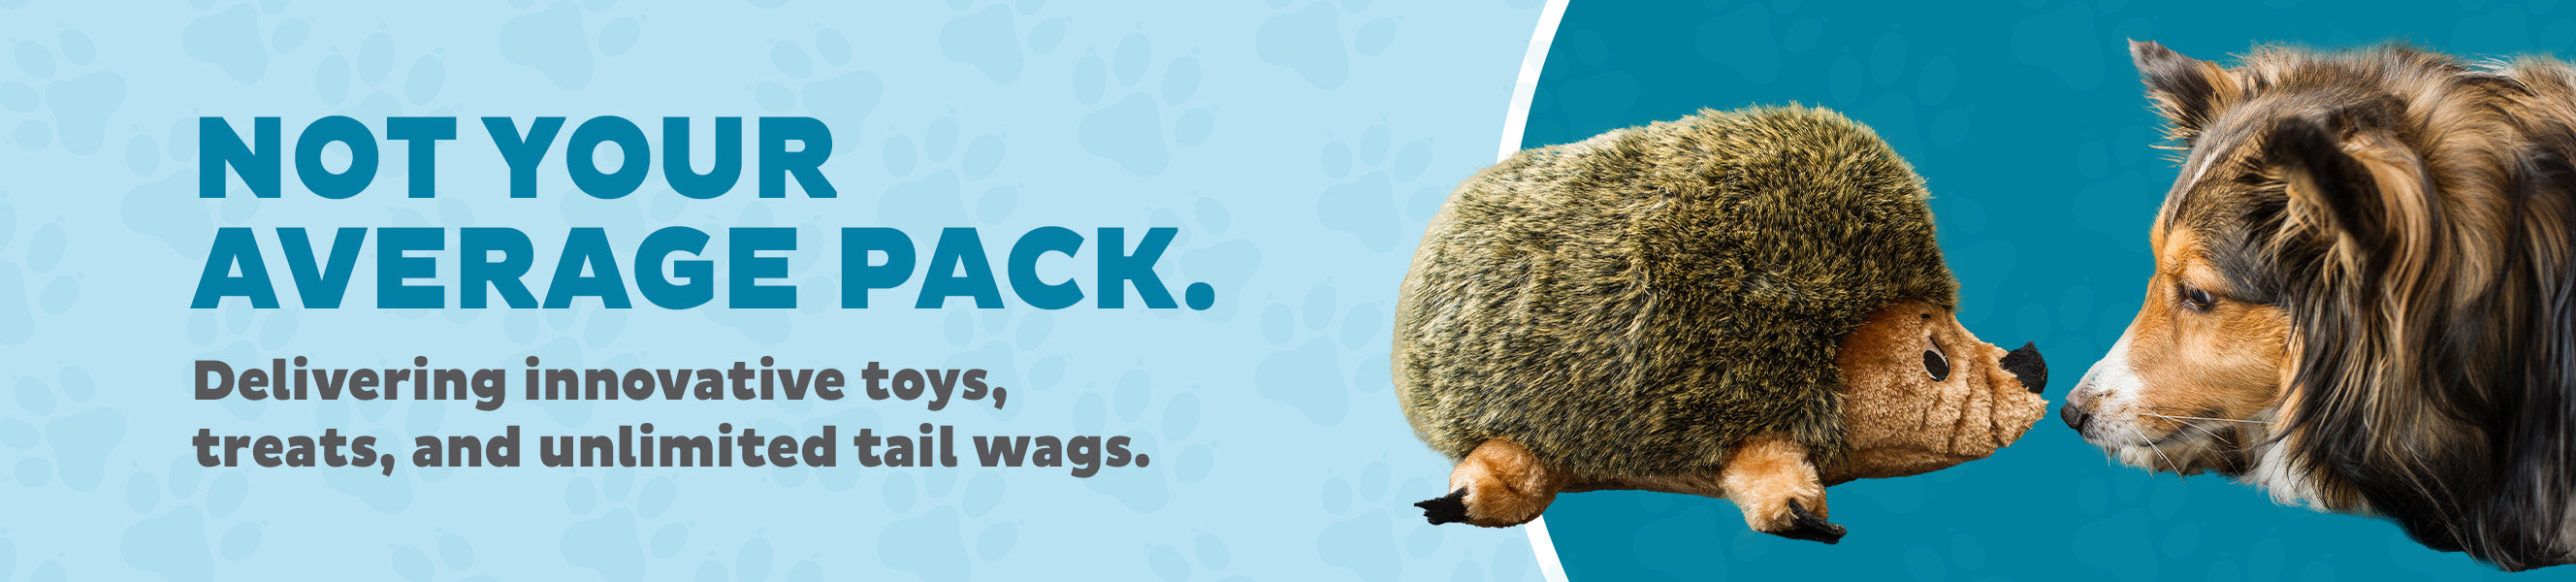 Not your average pack. delivering innovative toys, treats and unlimited tail wags.